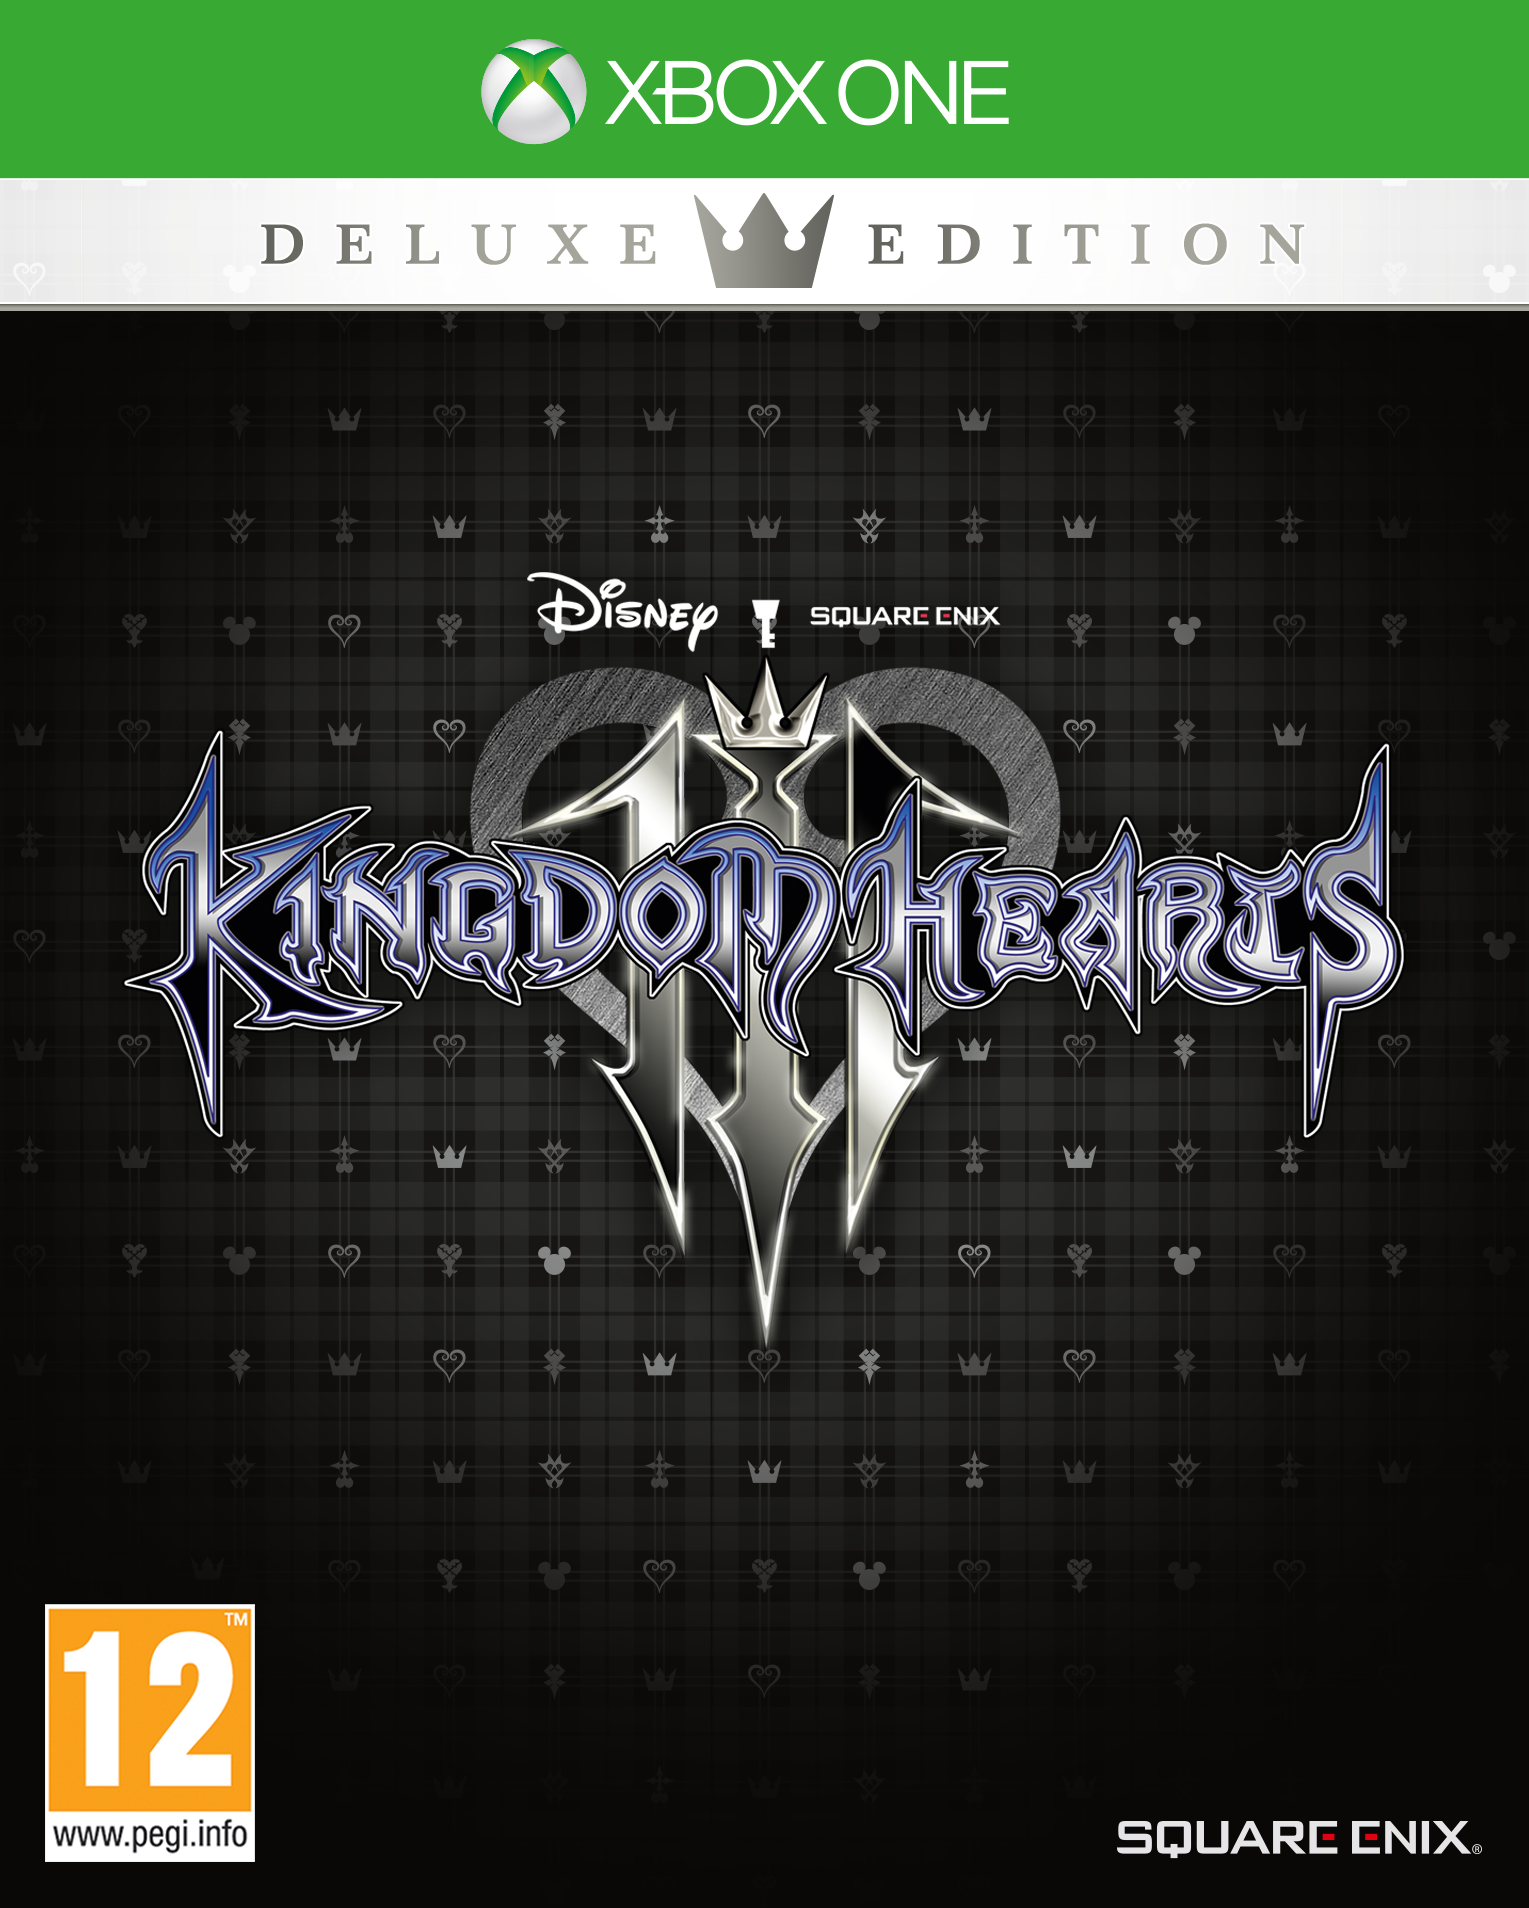 whats the difference between standard and deluxe kingdom hearts 3